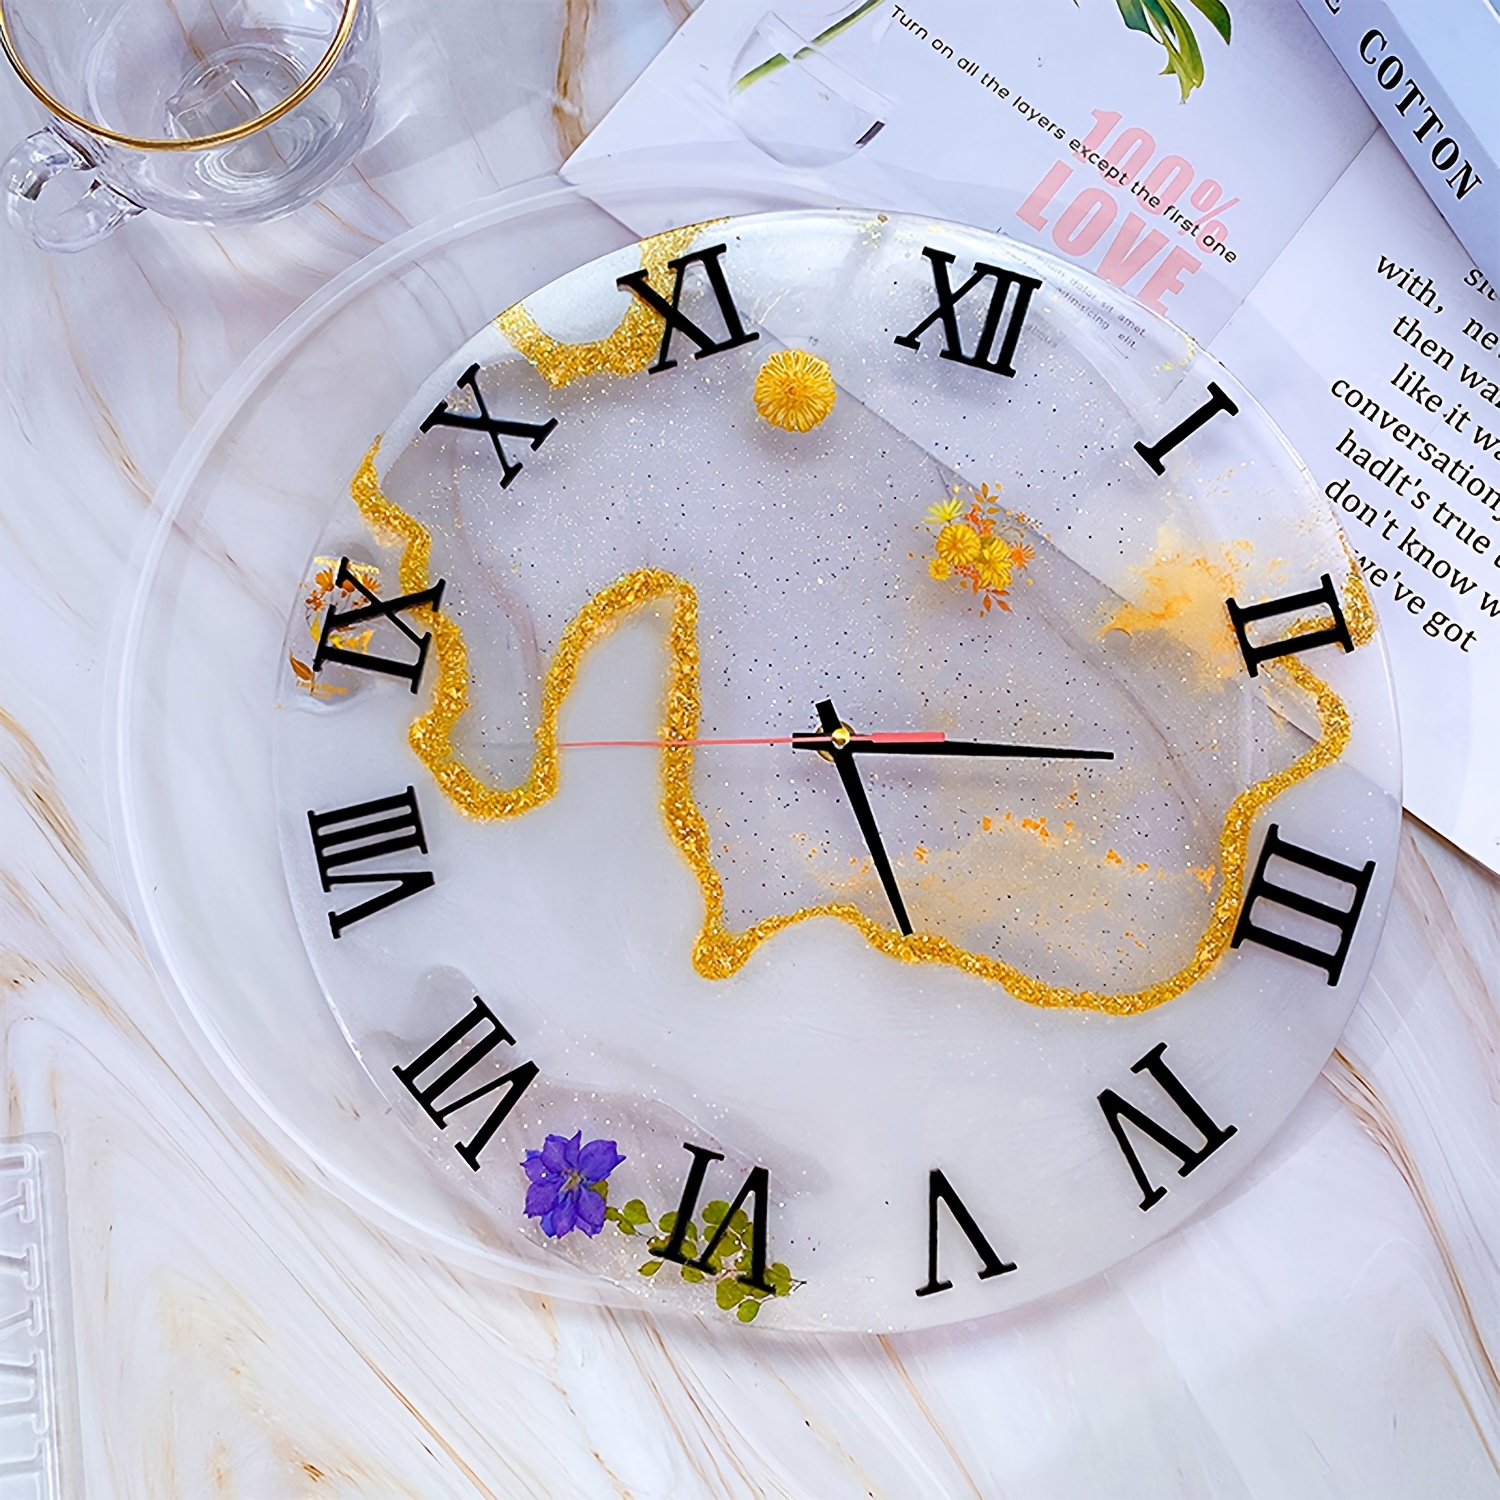 Resin Clock Mold with Clock Parts, Arabic Numerals Clock Silicone Mou, MiniatureSweet, Kawaii Resin Crafts, Decoden Cabochons Supplies